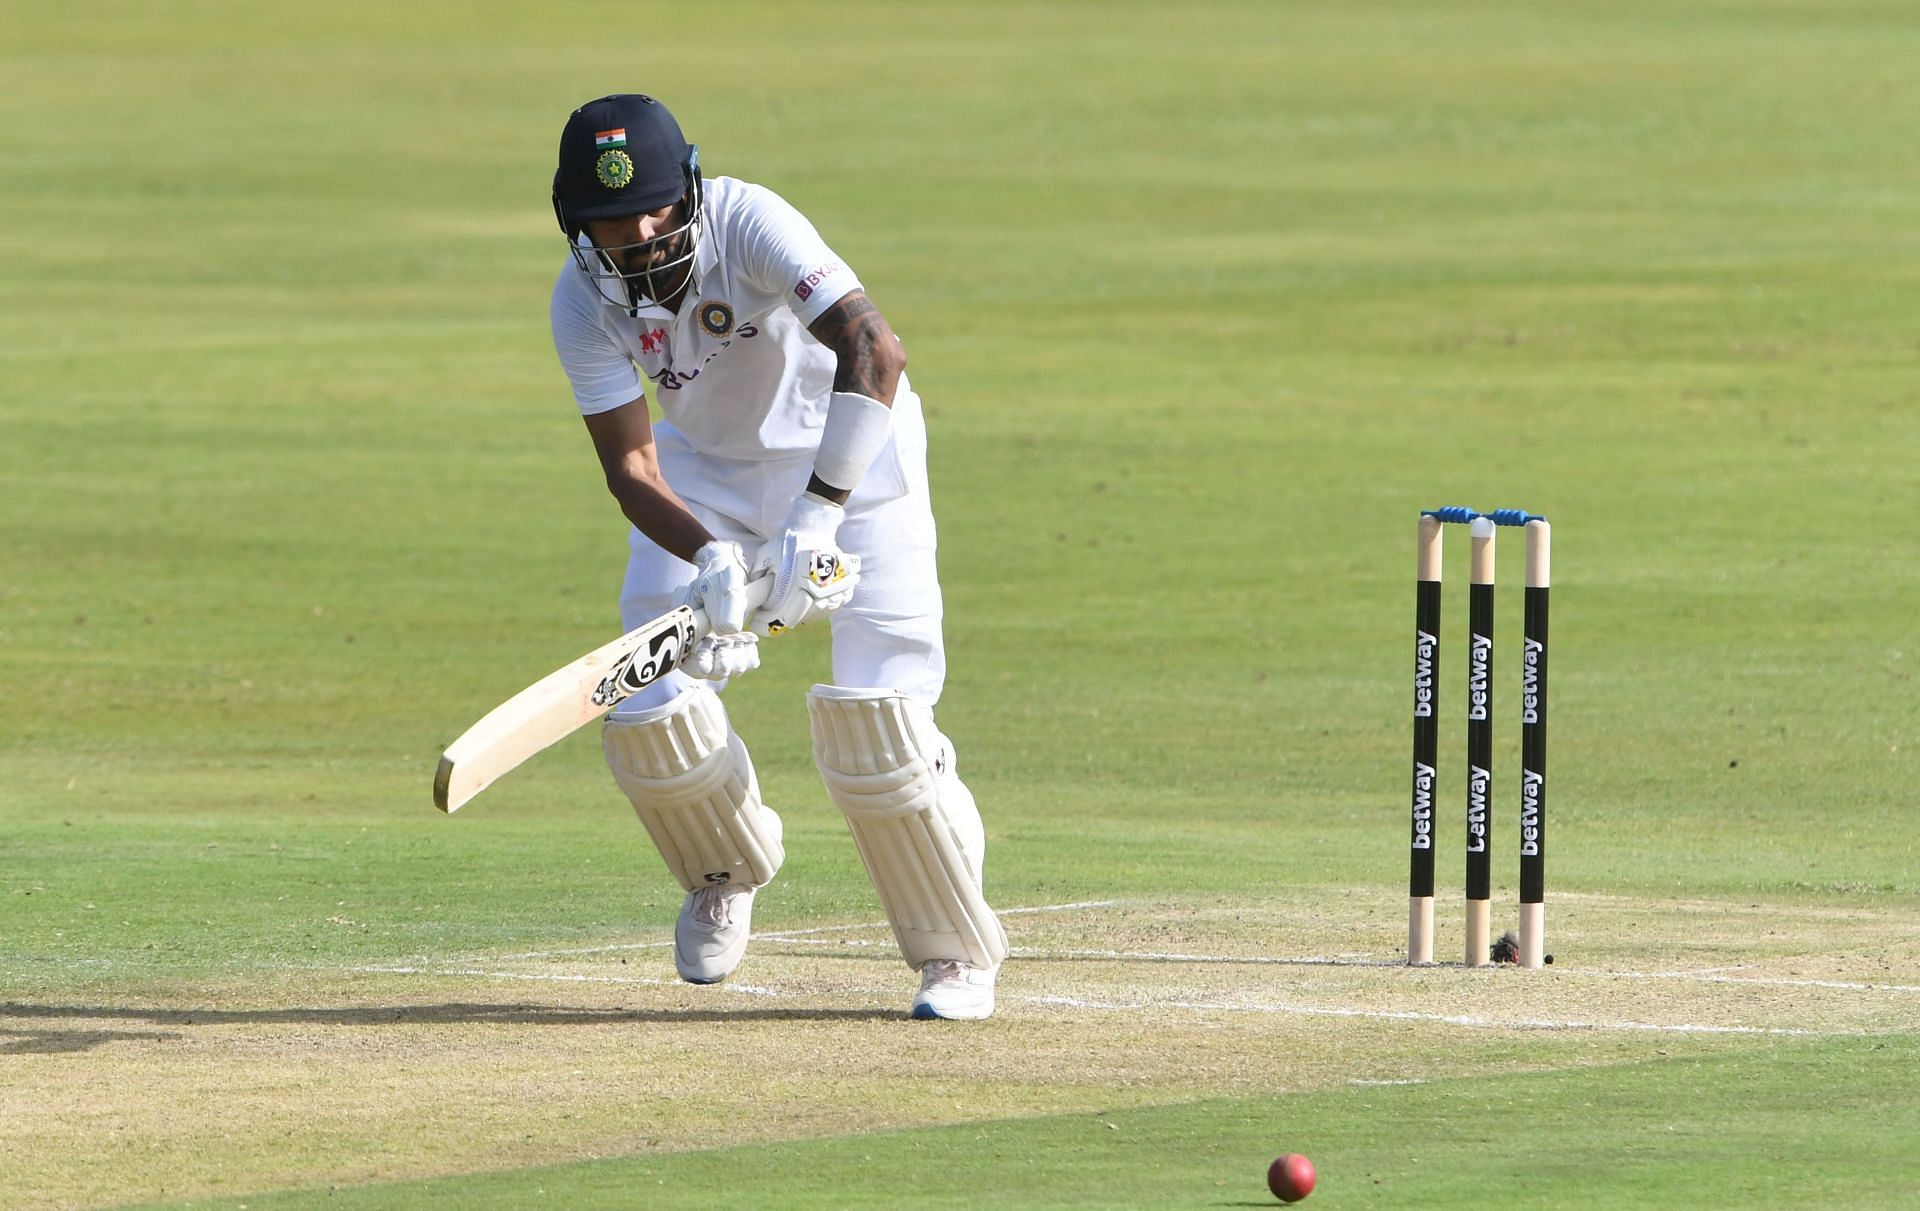 KL Rahul was the only half-centurion in the Indian innings at the Wanderers on Monday.